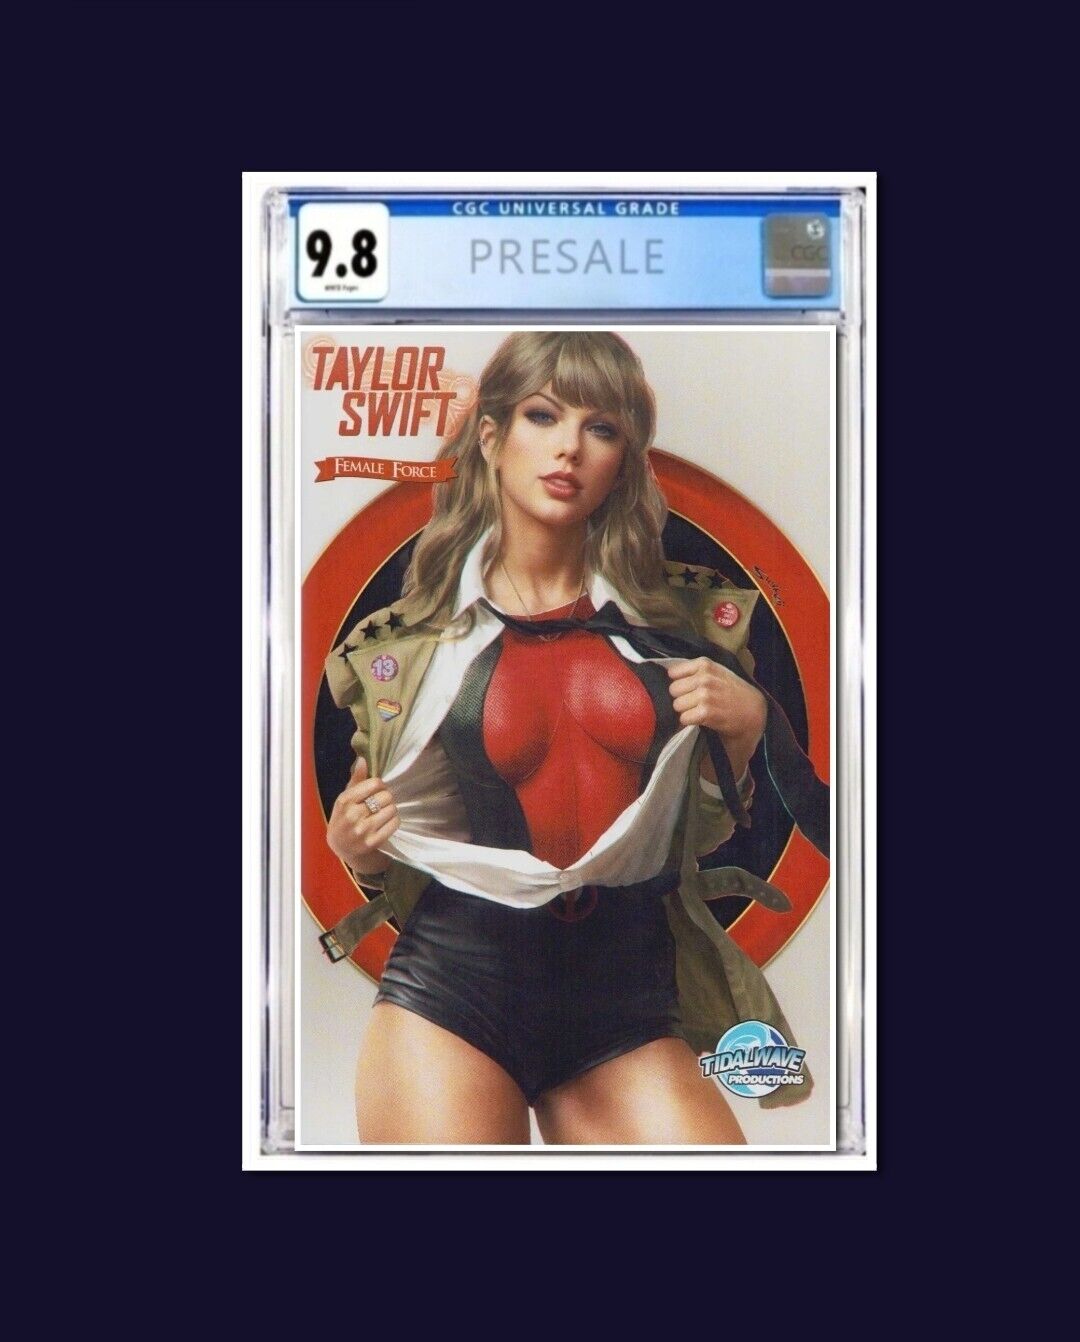 Female Force Taylor Swift #1 CGC 9.8 PREORDER Shikarii Variant Limited 1000 🔥 